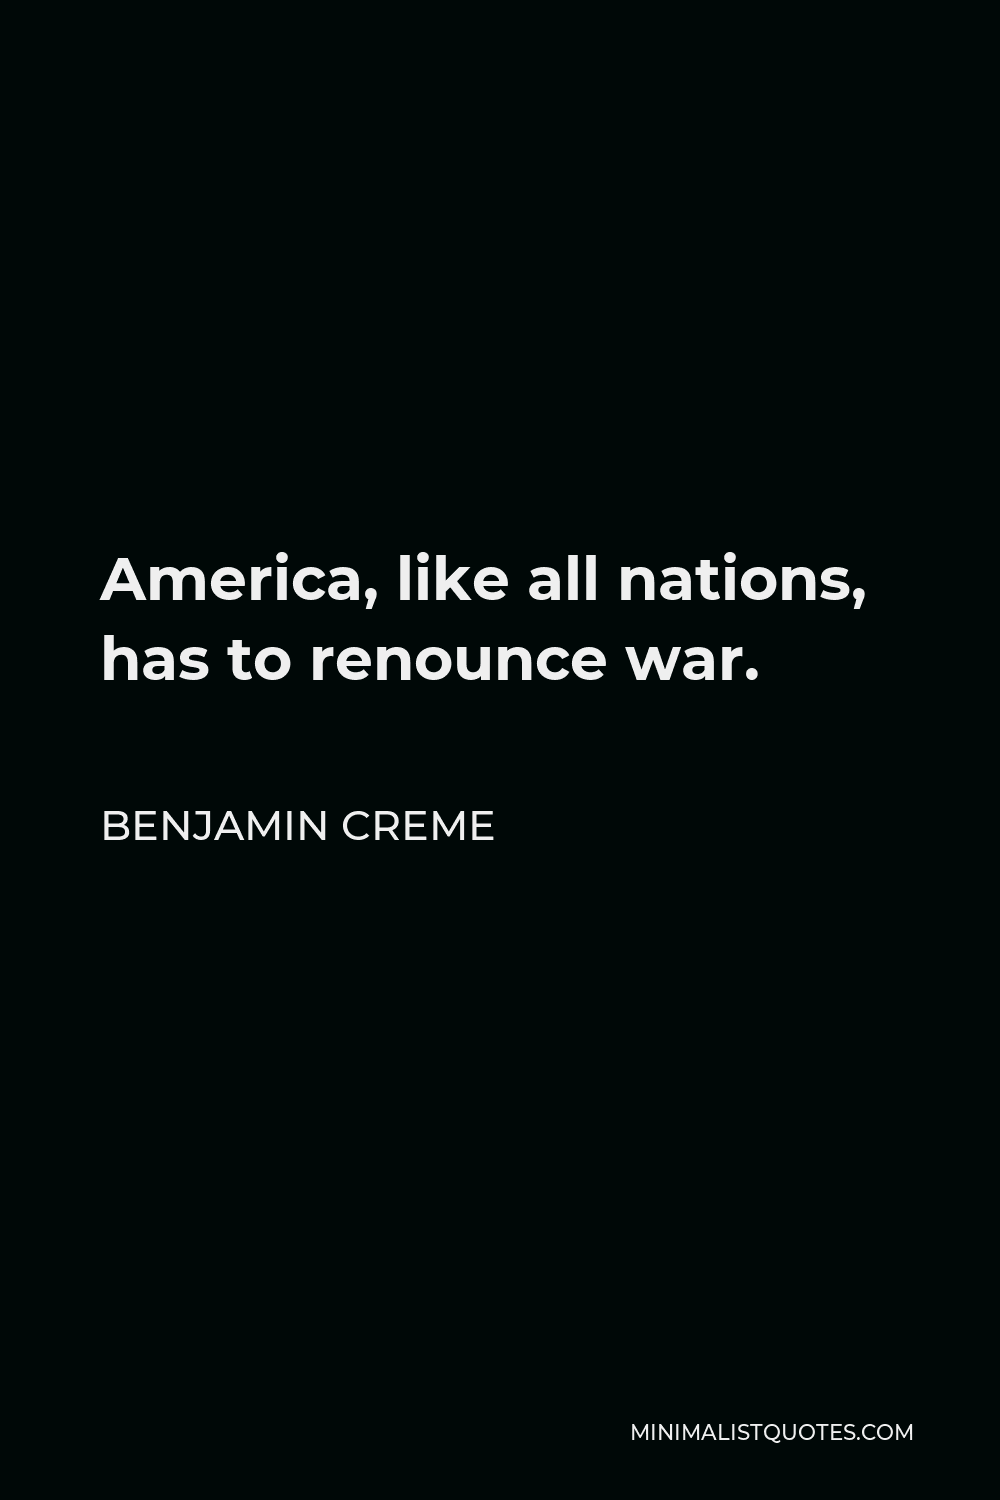 Benjamin Creme Quote - America, like all nations, has to renounce war.